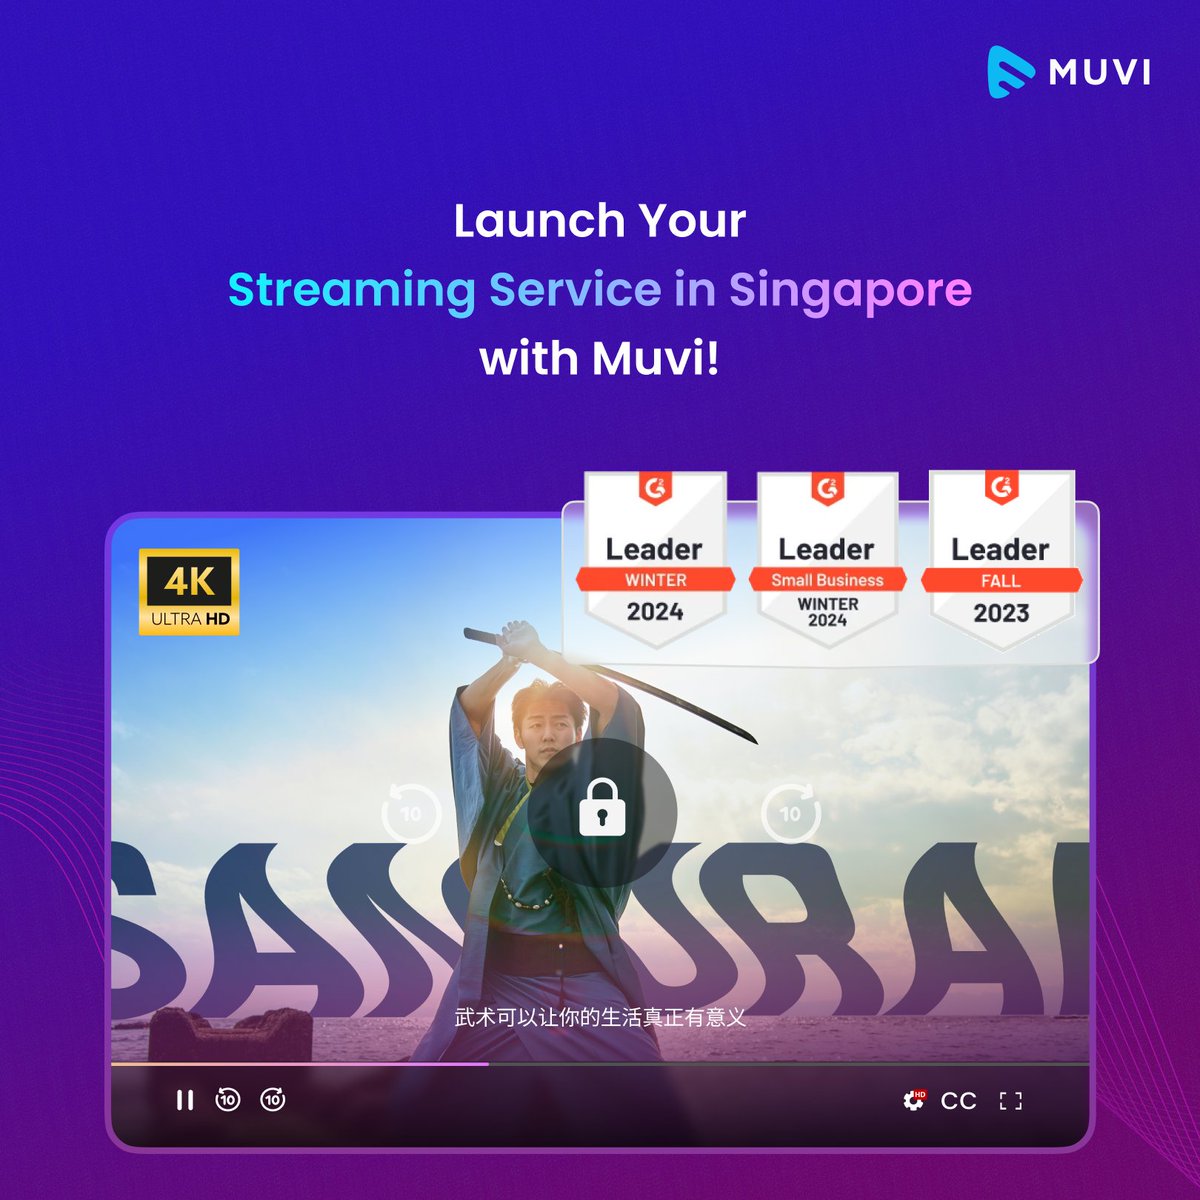 Ready to captivate Singaporean audiences? Muvi makes it easy to launch your video streaming service in Singapore hassle-free! 👉 muvi.com/streaming-serv… 
#Muvi #VideoStreaming #SingaporeStreaming #Singapore #streamingplatform #ott #ottindustry #onlinestreaming